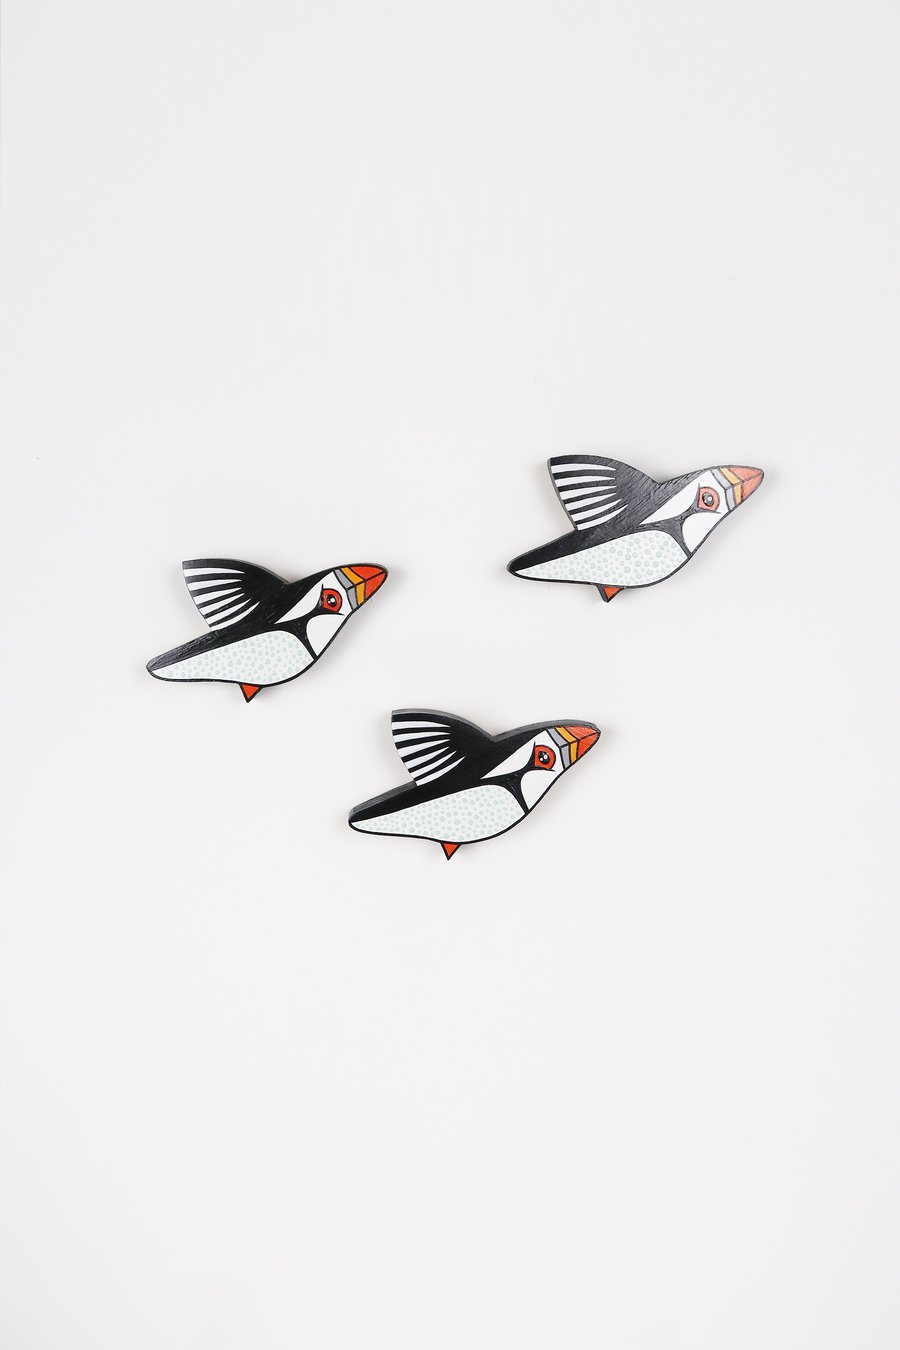 Puffin wall decoration, set of 3 flying miniature wooden birds, bird lover gift.